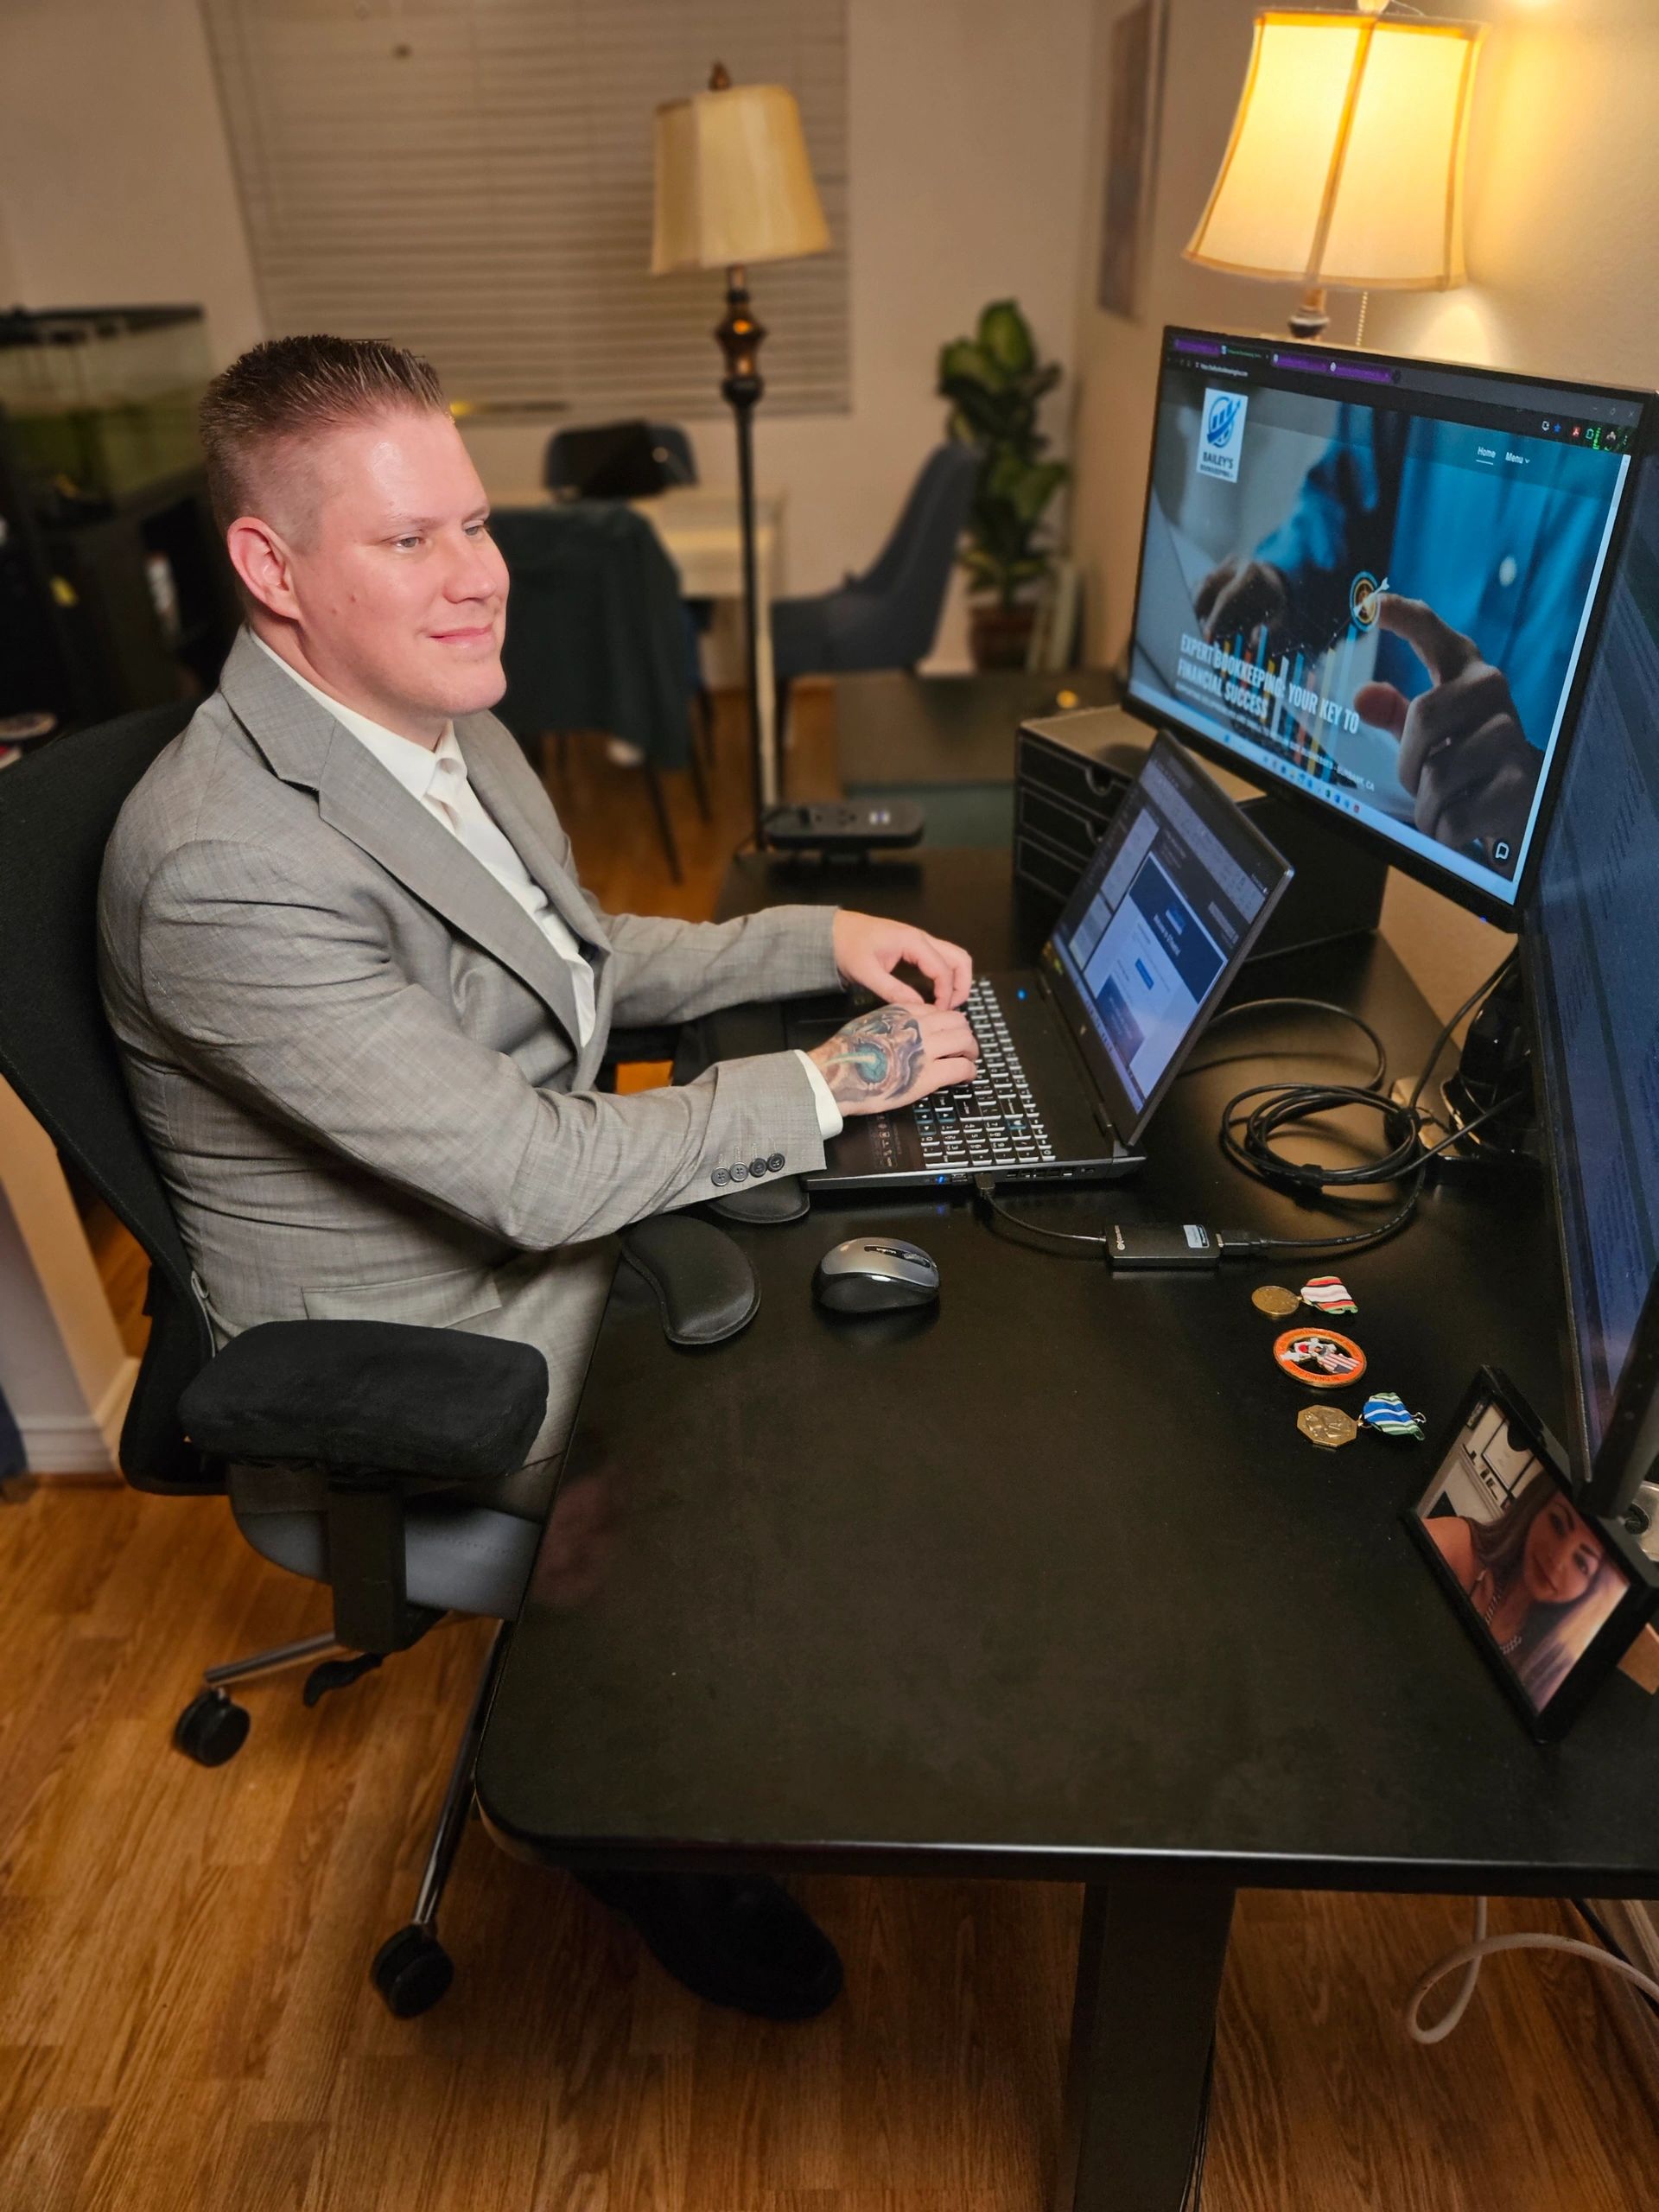 Bailey, Founder/Bookkeeping Pro, smiles while typing on laptop at desk with dual monitors.